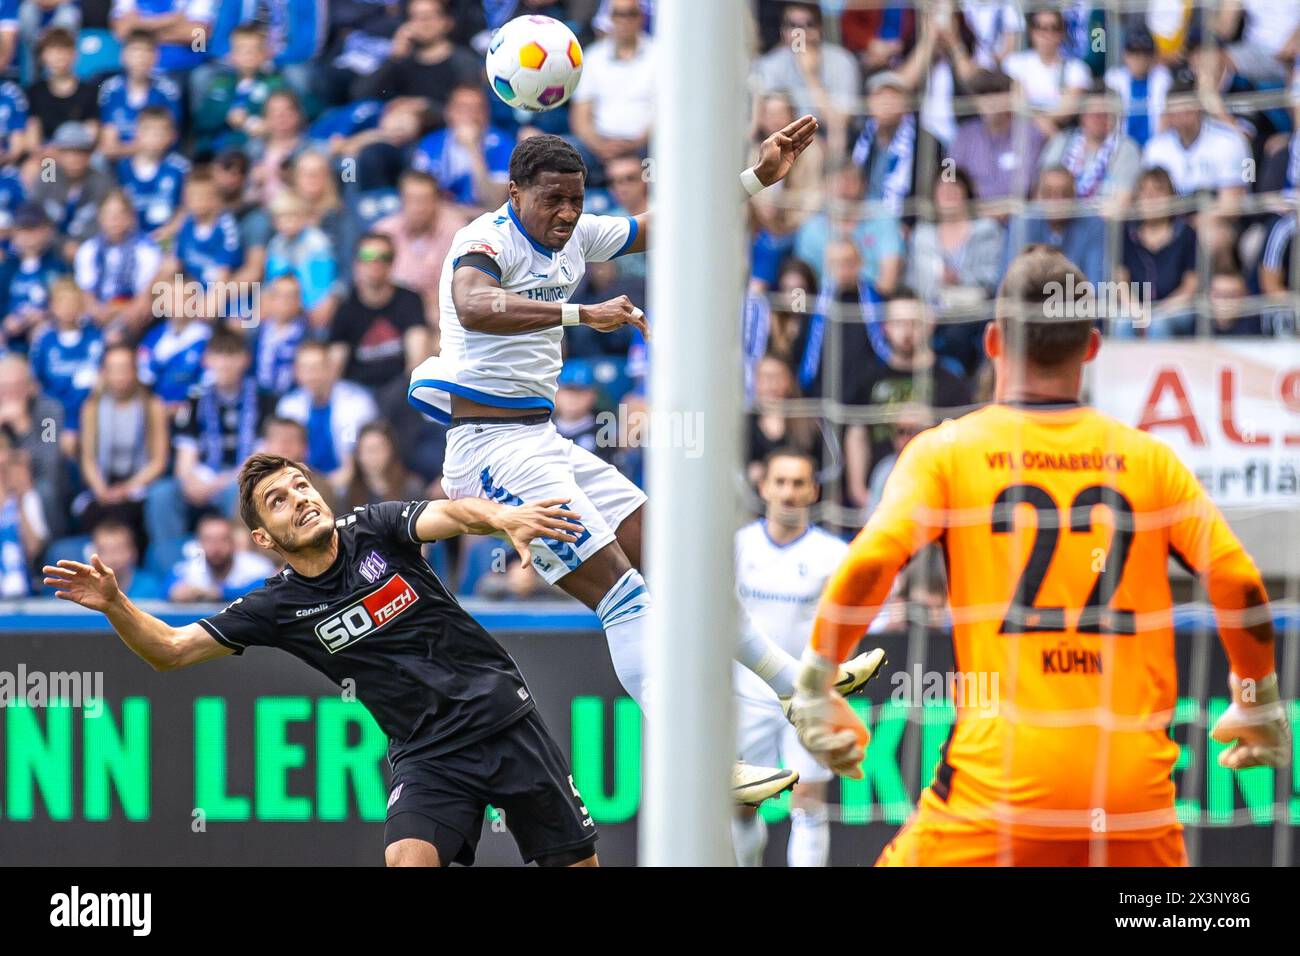 Magdeburg, Germany. 28th Apr, 2024. Soccer: Bundesliga 2, 1. FC Magdeburg - VfL Osnabrück, Matchday 31, MDCC-Arena. Bryan Teixeira (M) of 1. FC Magdeburg goes for a header against Osnabrück's Bashkim Ajdini. Credit: Andreas Gora/dpa - IMPORTANT NOTE: In accordance with the regulations of the DFL German Football League and the DFB German Football Association, it is prohibited to utilize or have utilized photographs taken in the stadium and/or of the match in the form of sequential images and/or video-like photo series./dpa/Alamy Live News Stock Photo